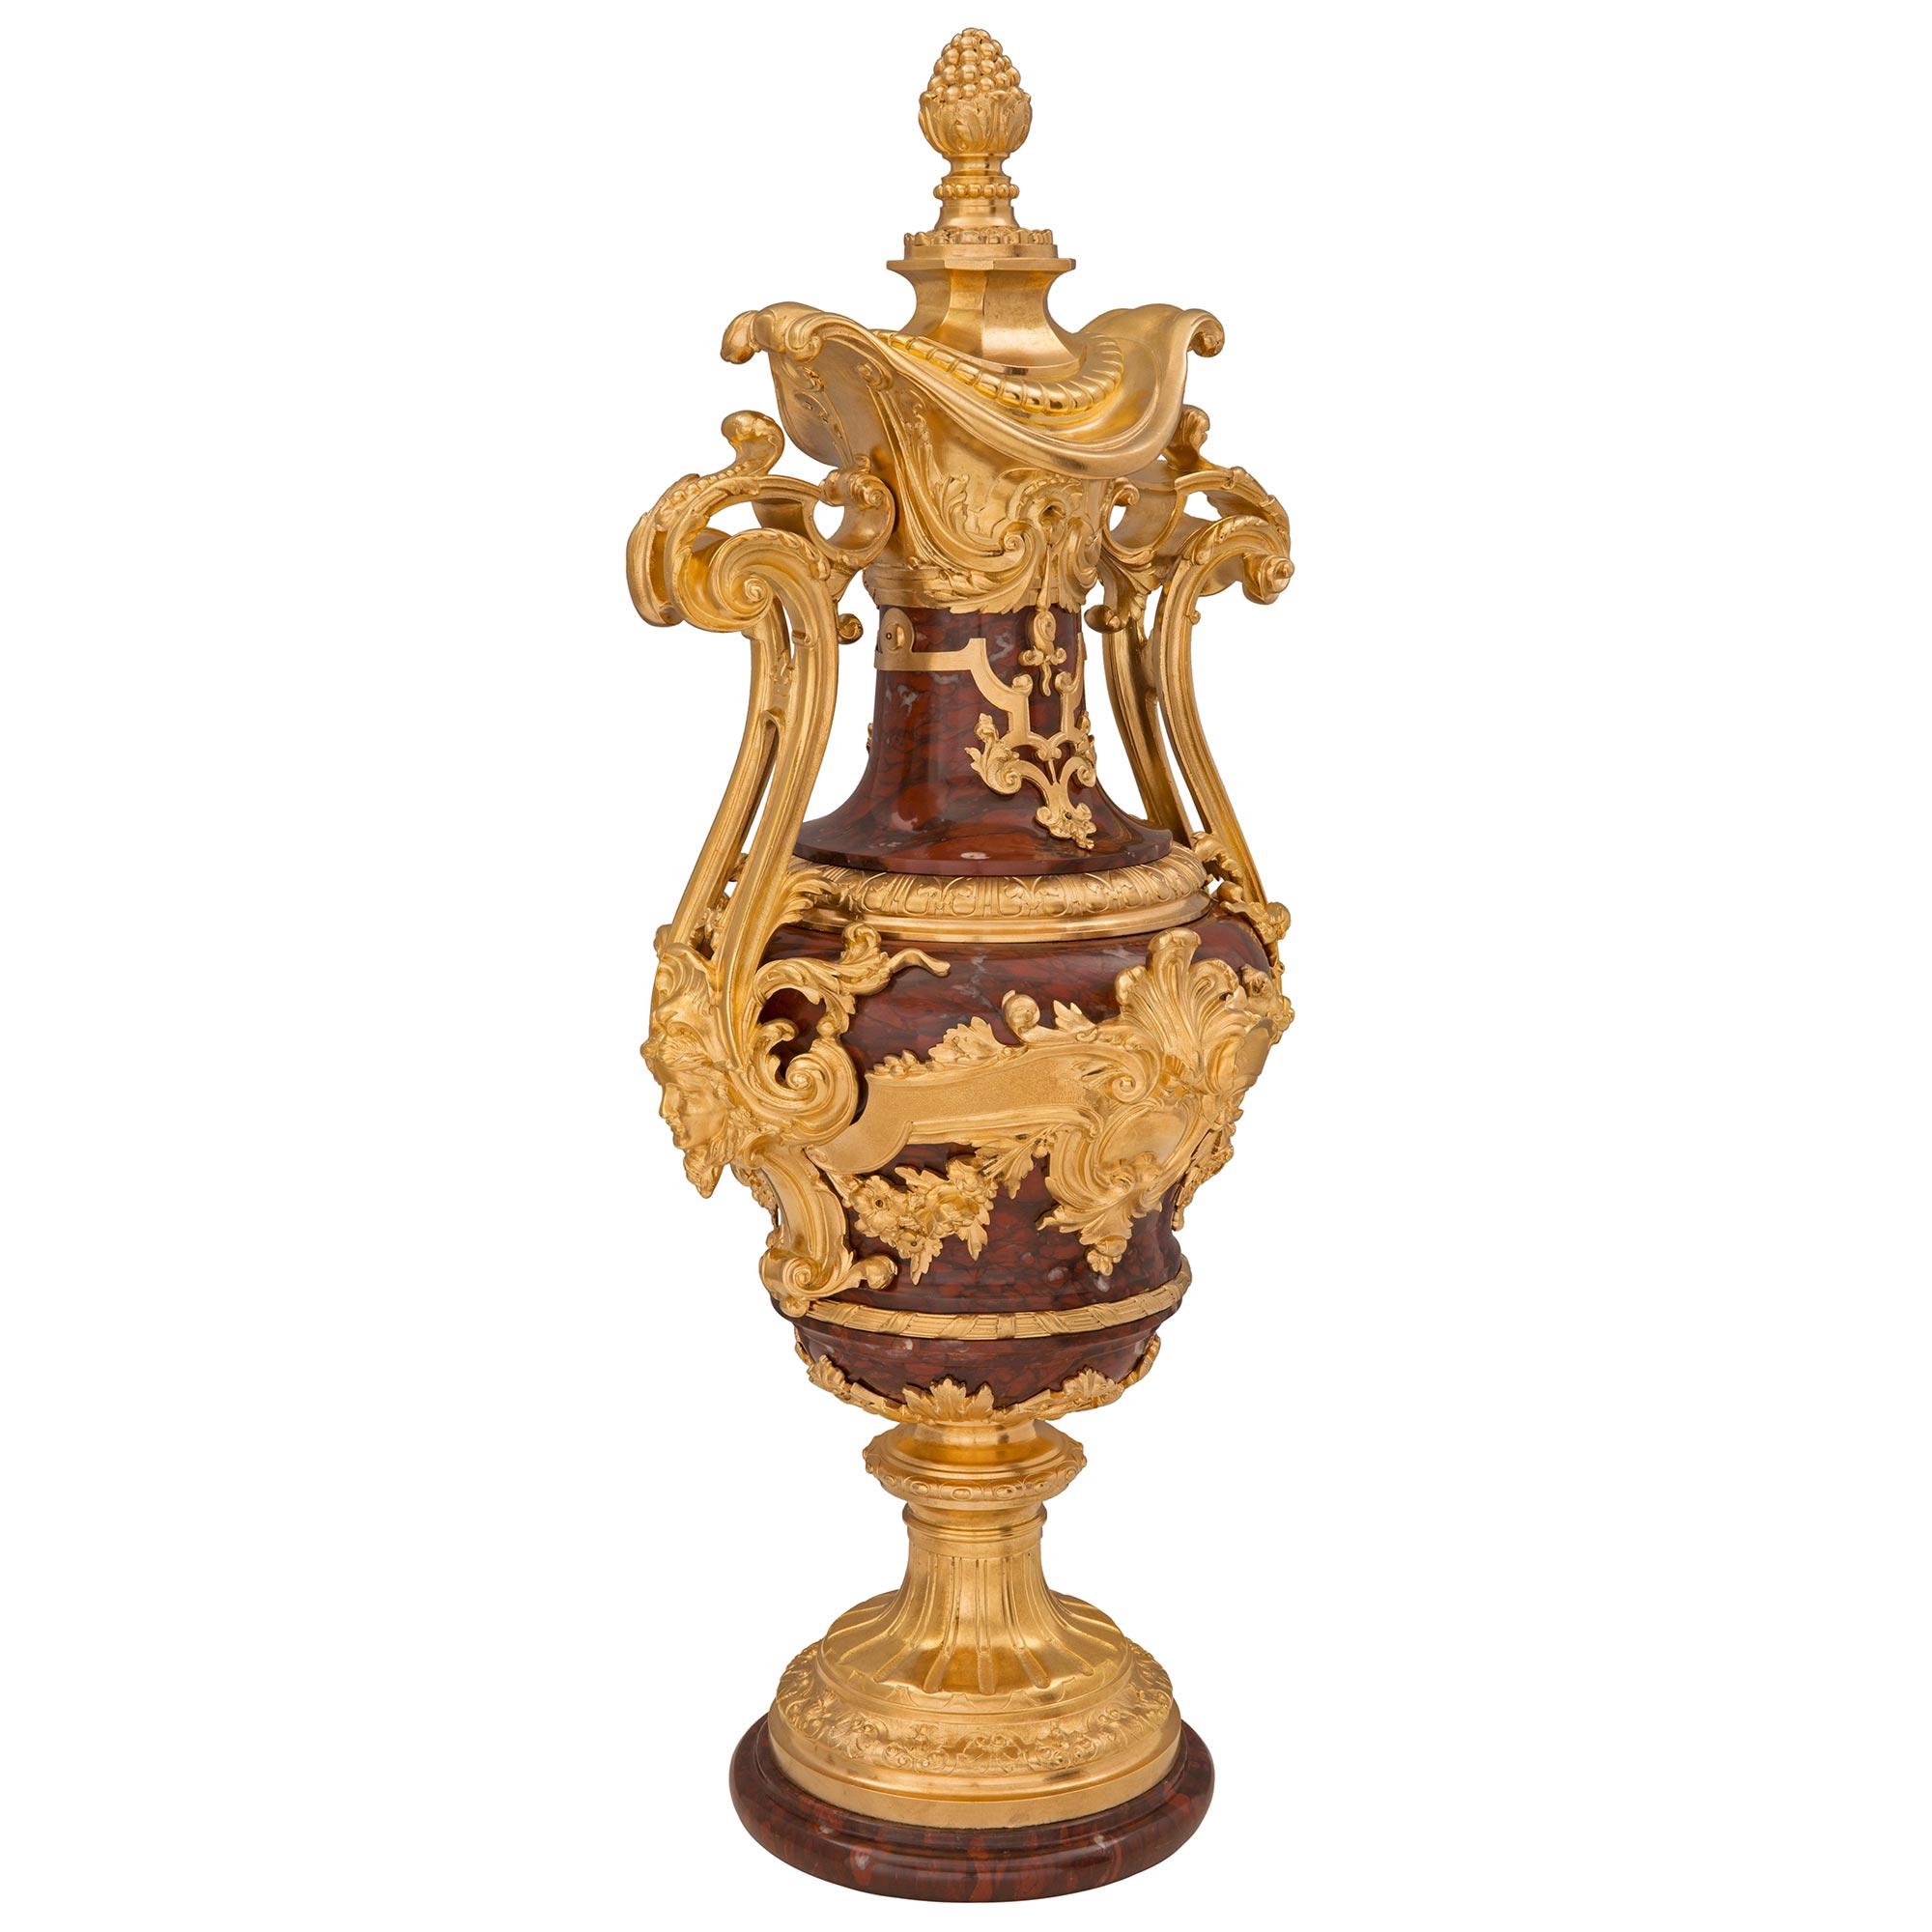 A stunning and extremely high quality pair of French 19th century Louis XVI st. Belle Époque period Rouge Griotte marble and ormolu urns, signed Ferdinand Barbedienne. Each most impressive urn is raised by a circular Rouge Griotte marble base with a